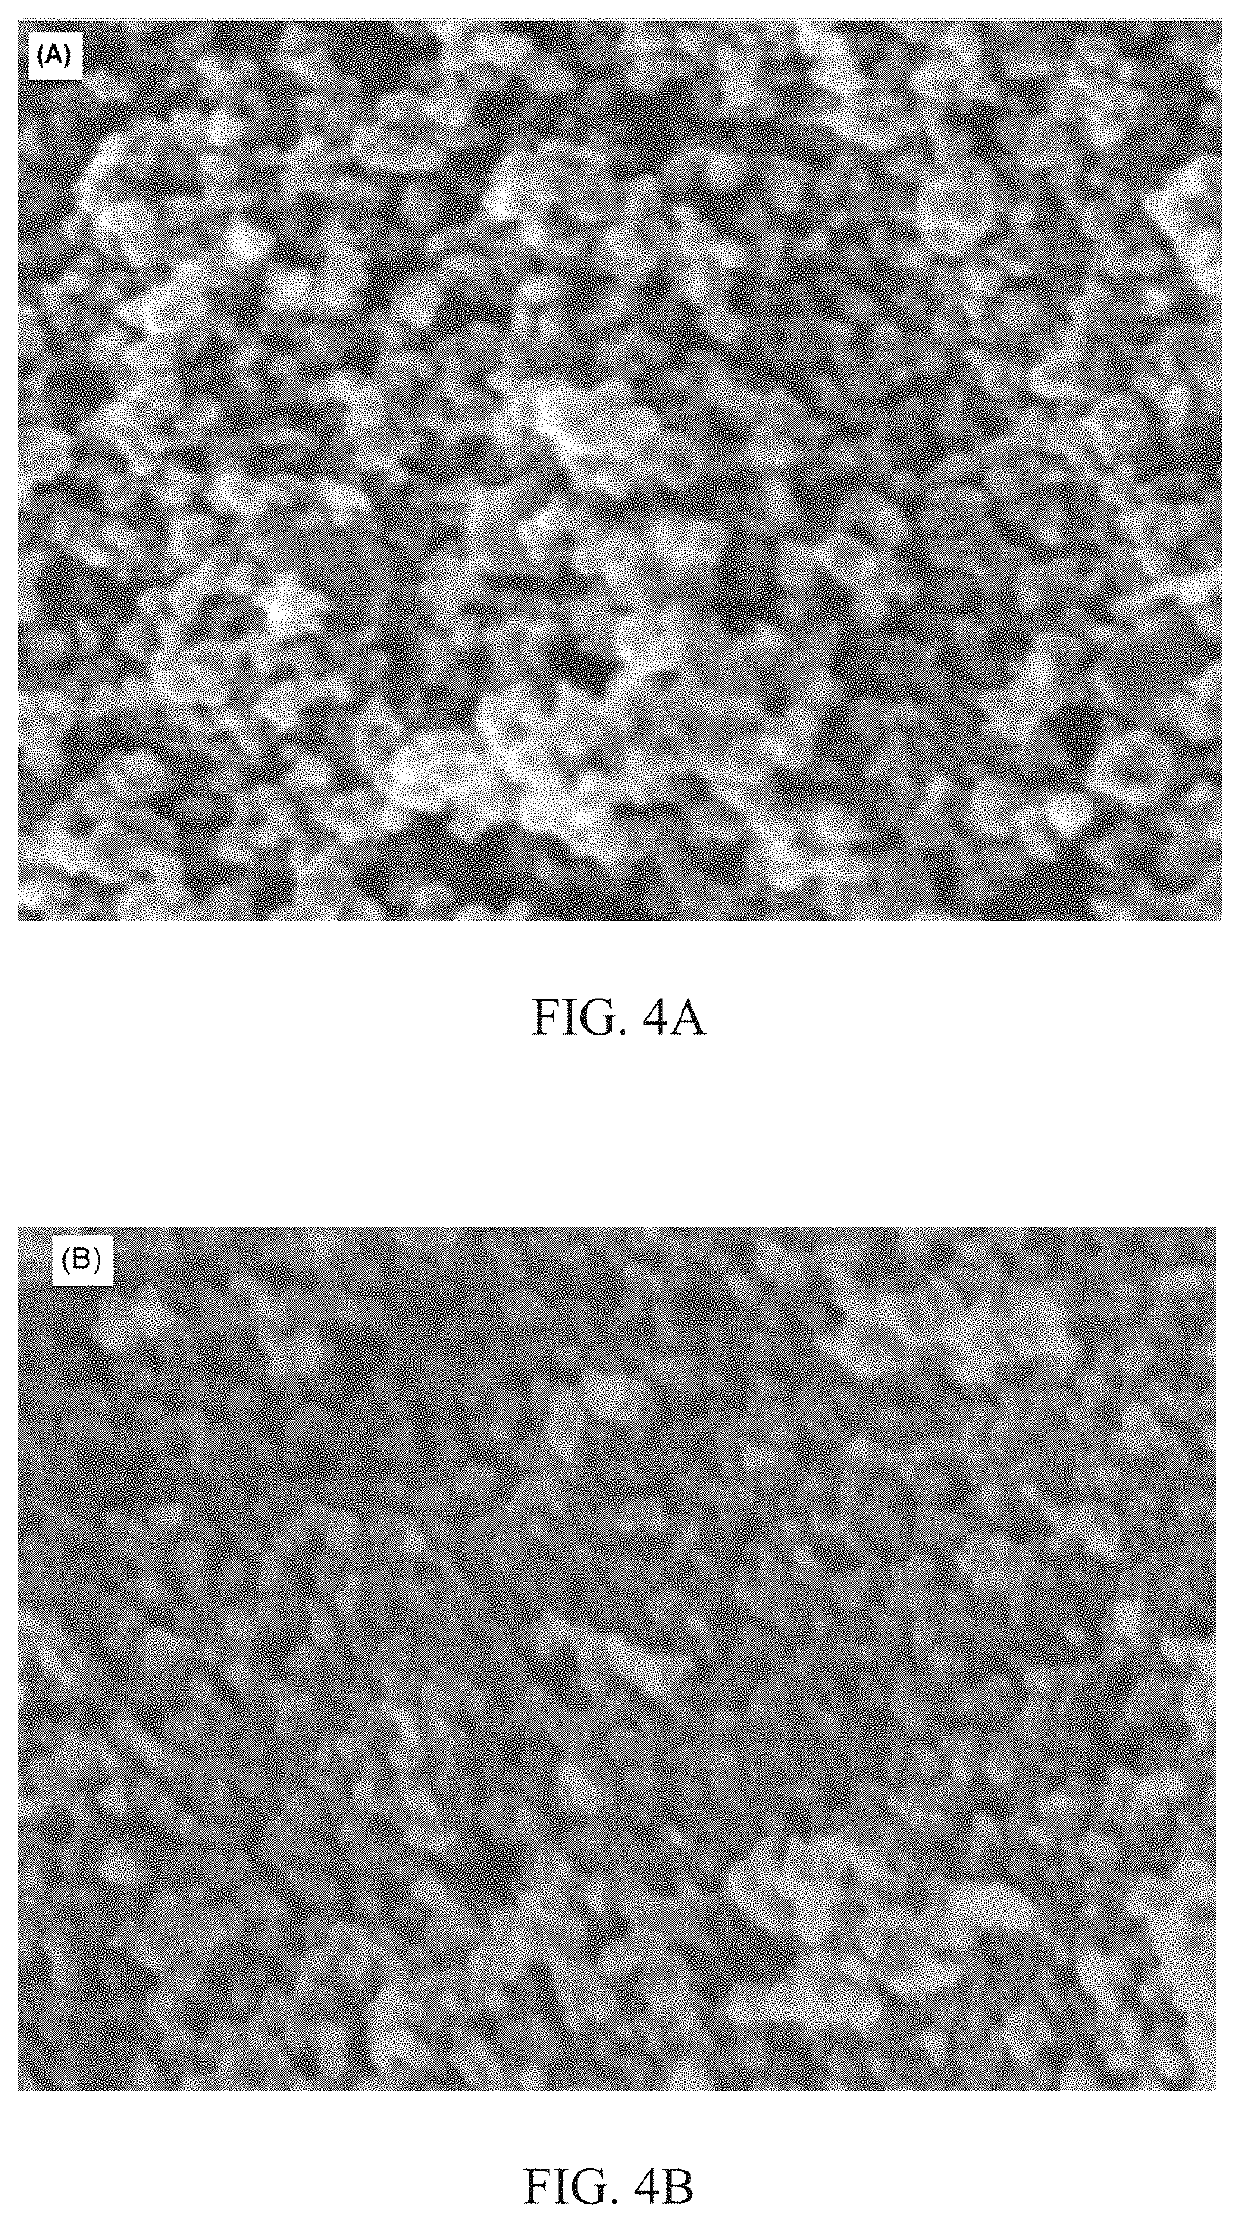 Marine natural products-based TiO<sub>2 </sub>nanoparticles as antifouling agents